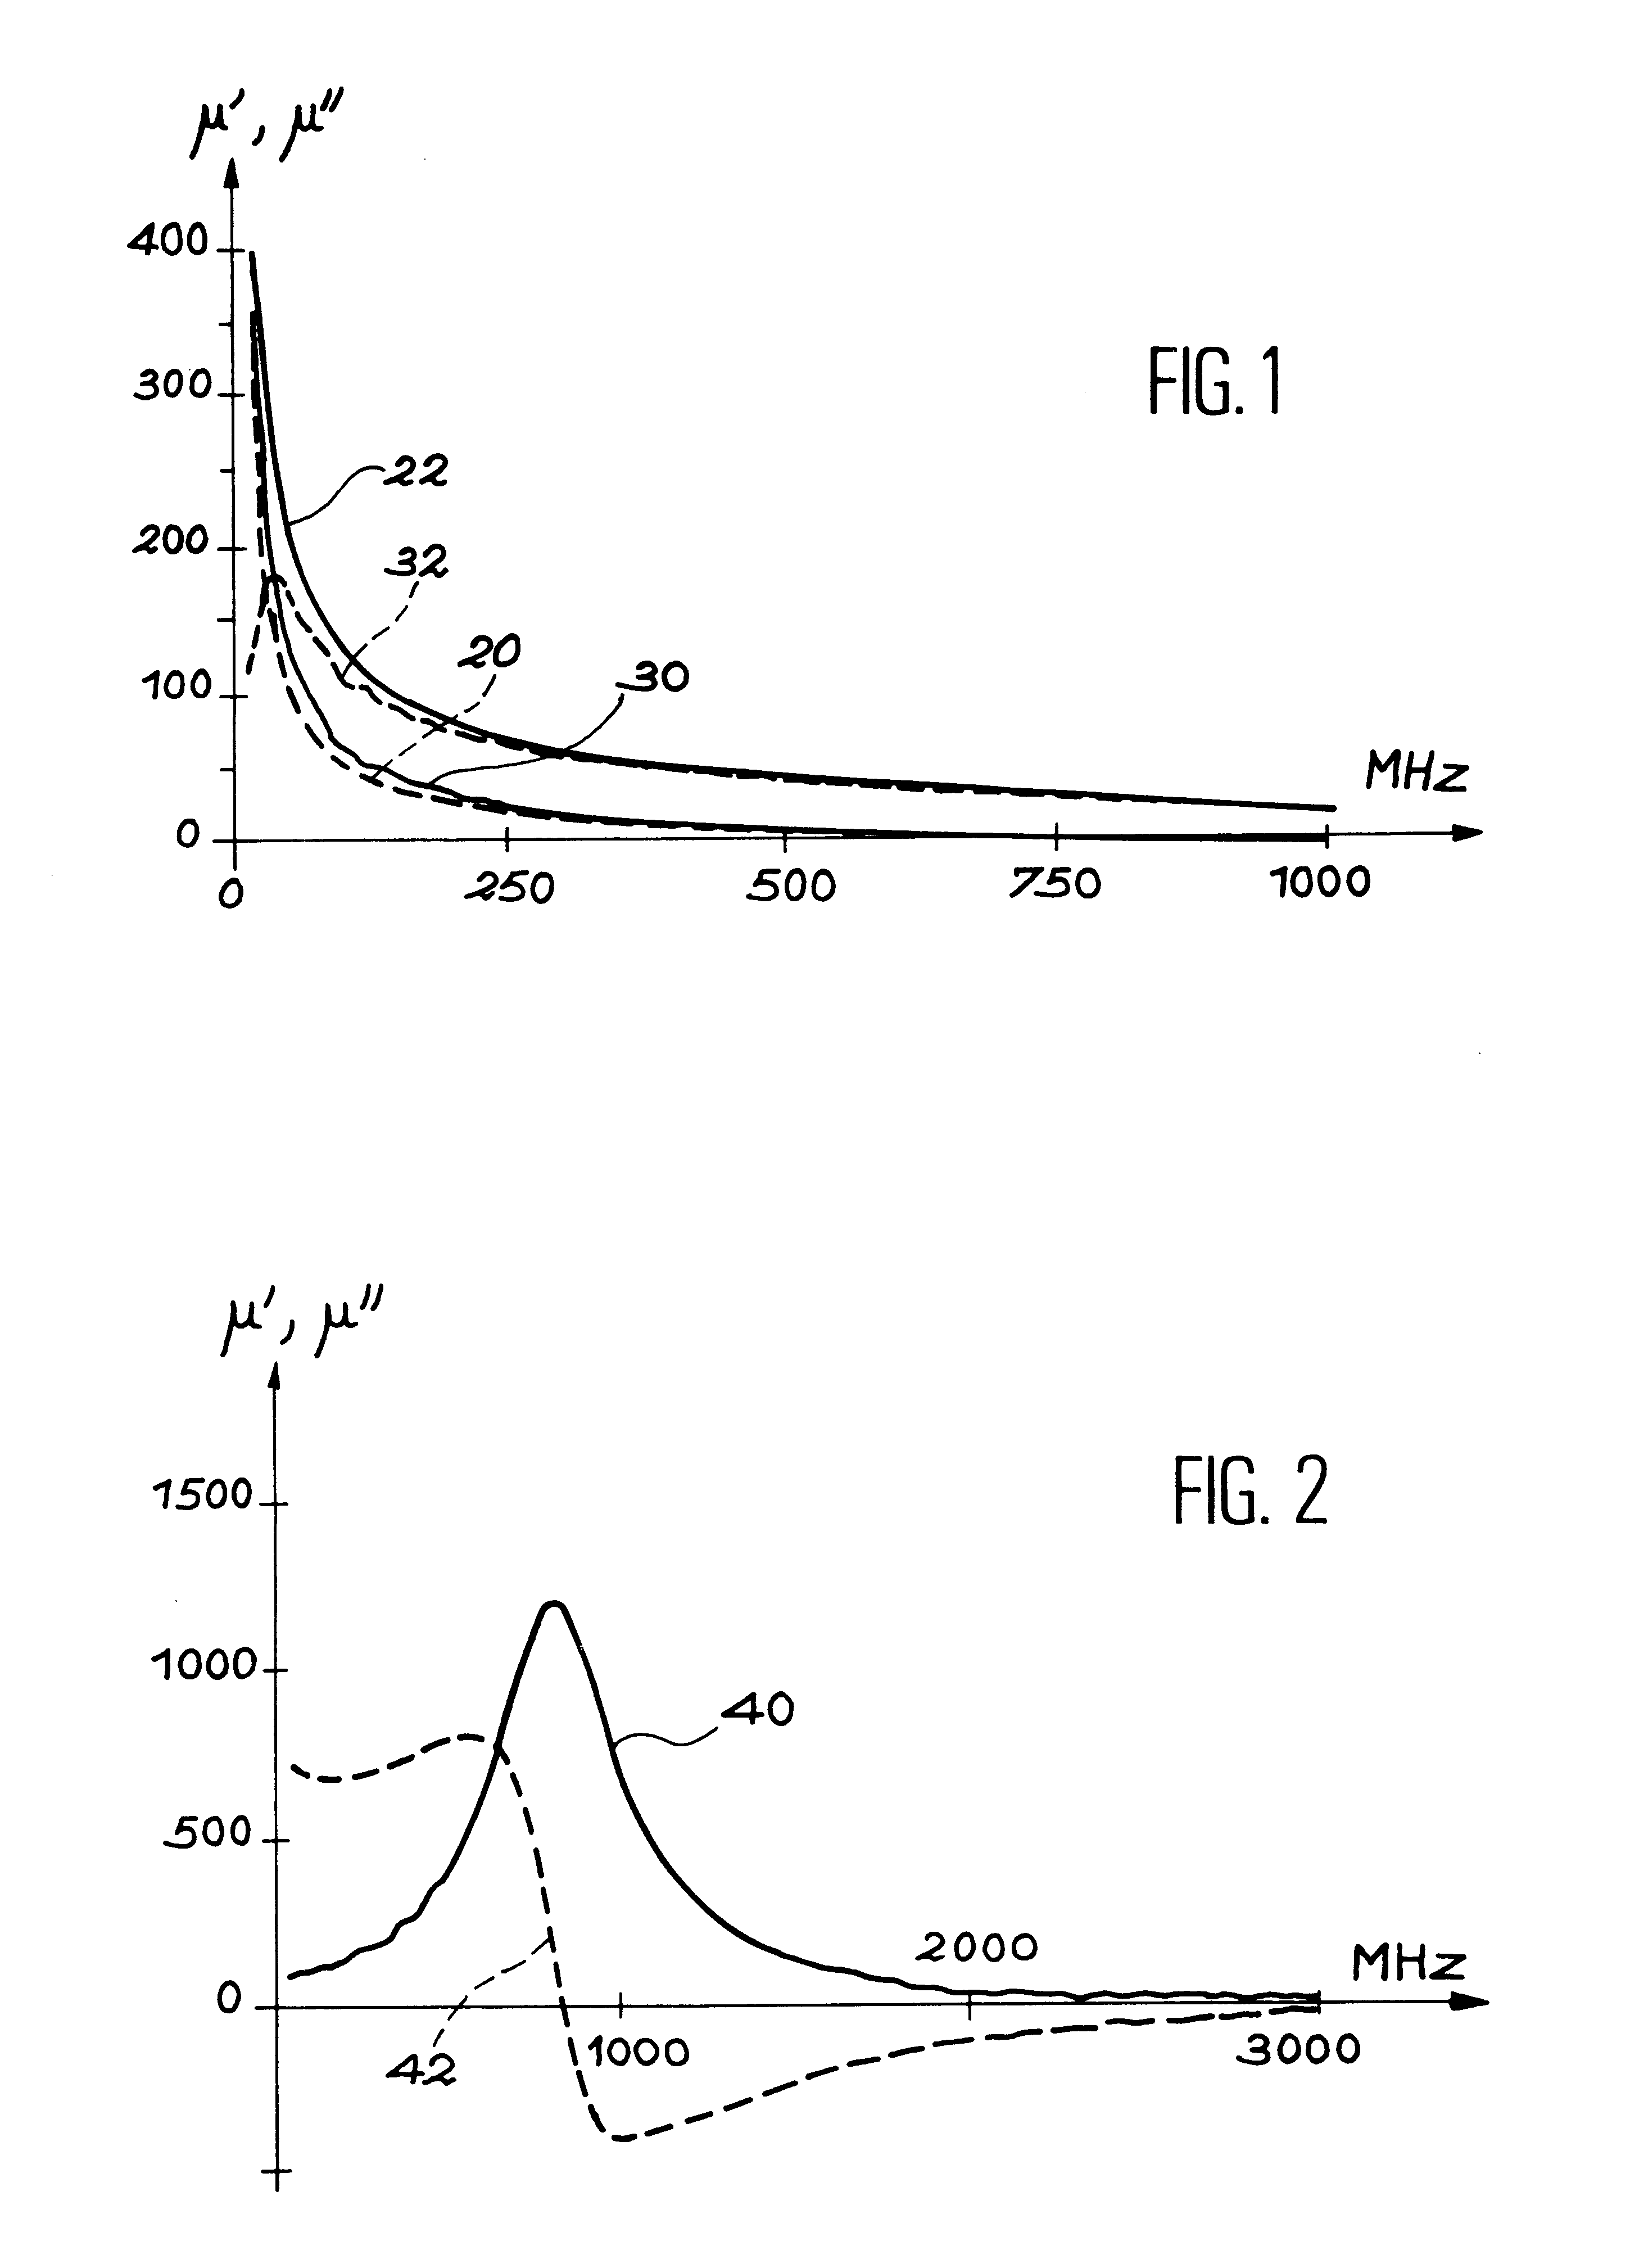 Method for determining the permeability of a magnetic material by coaxial line perturbation